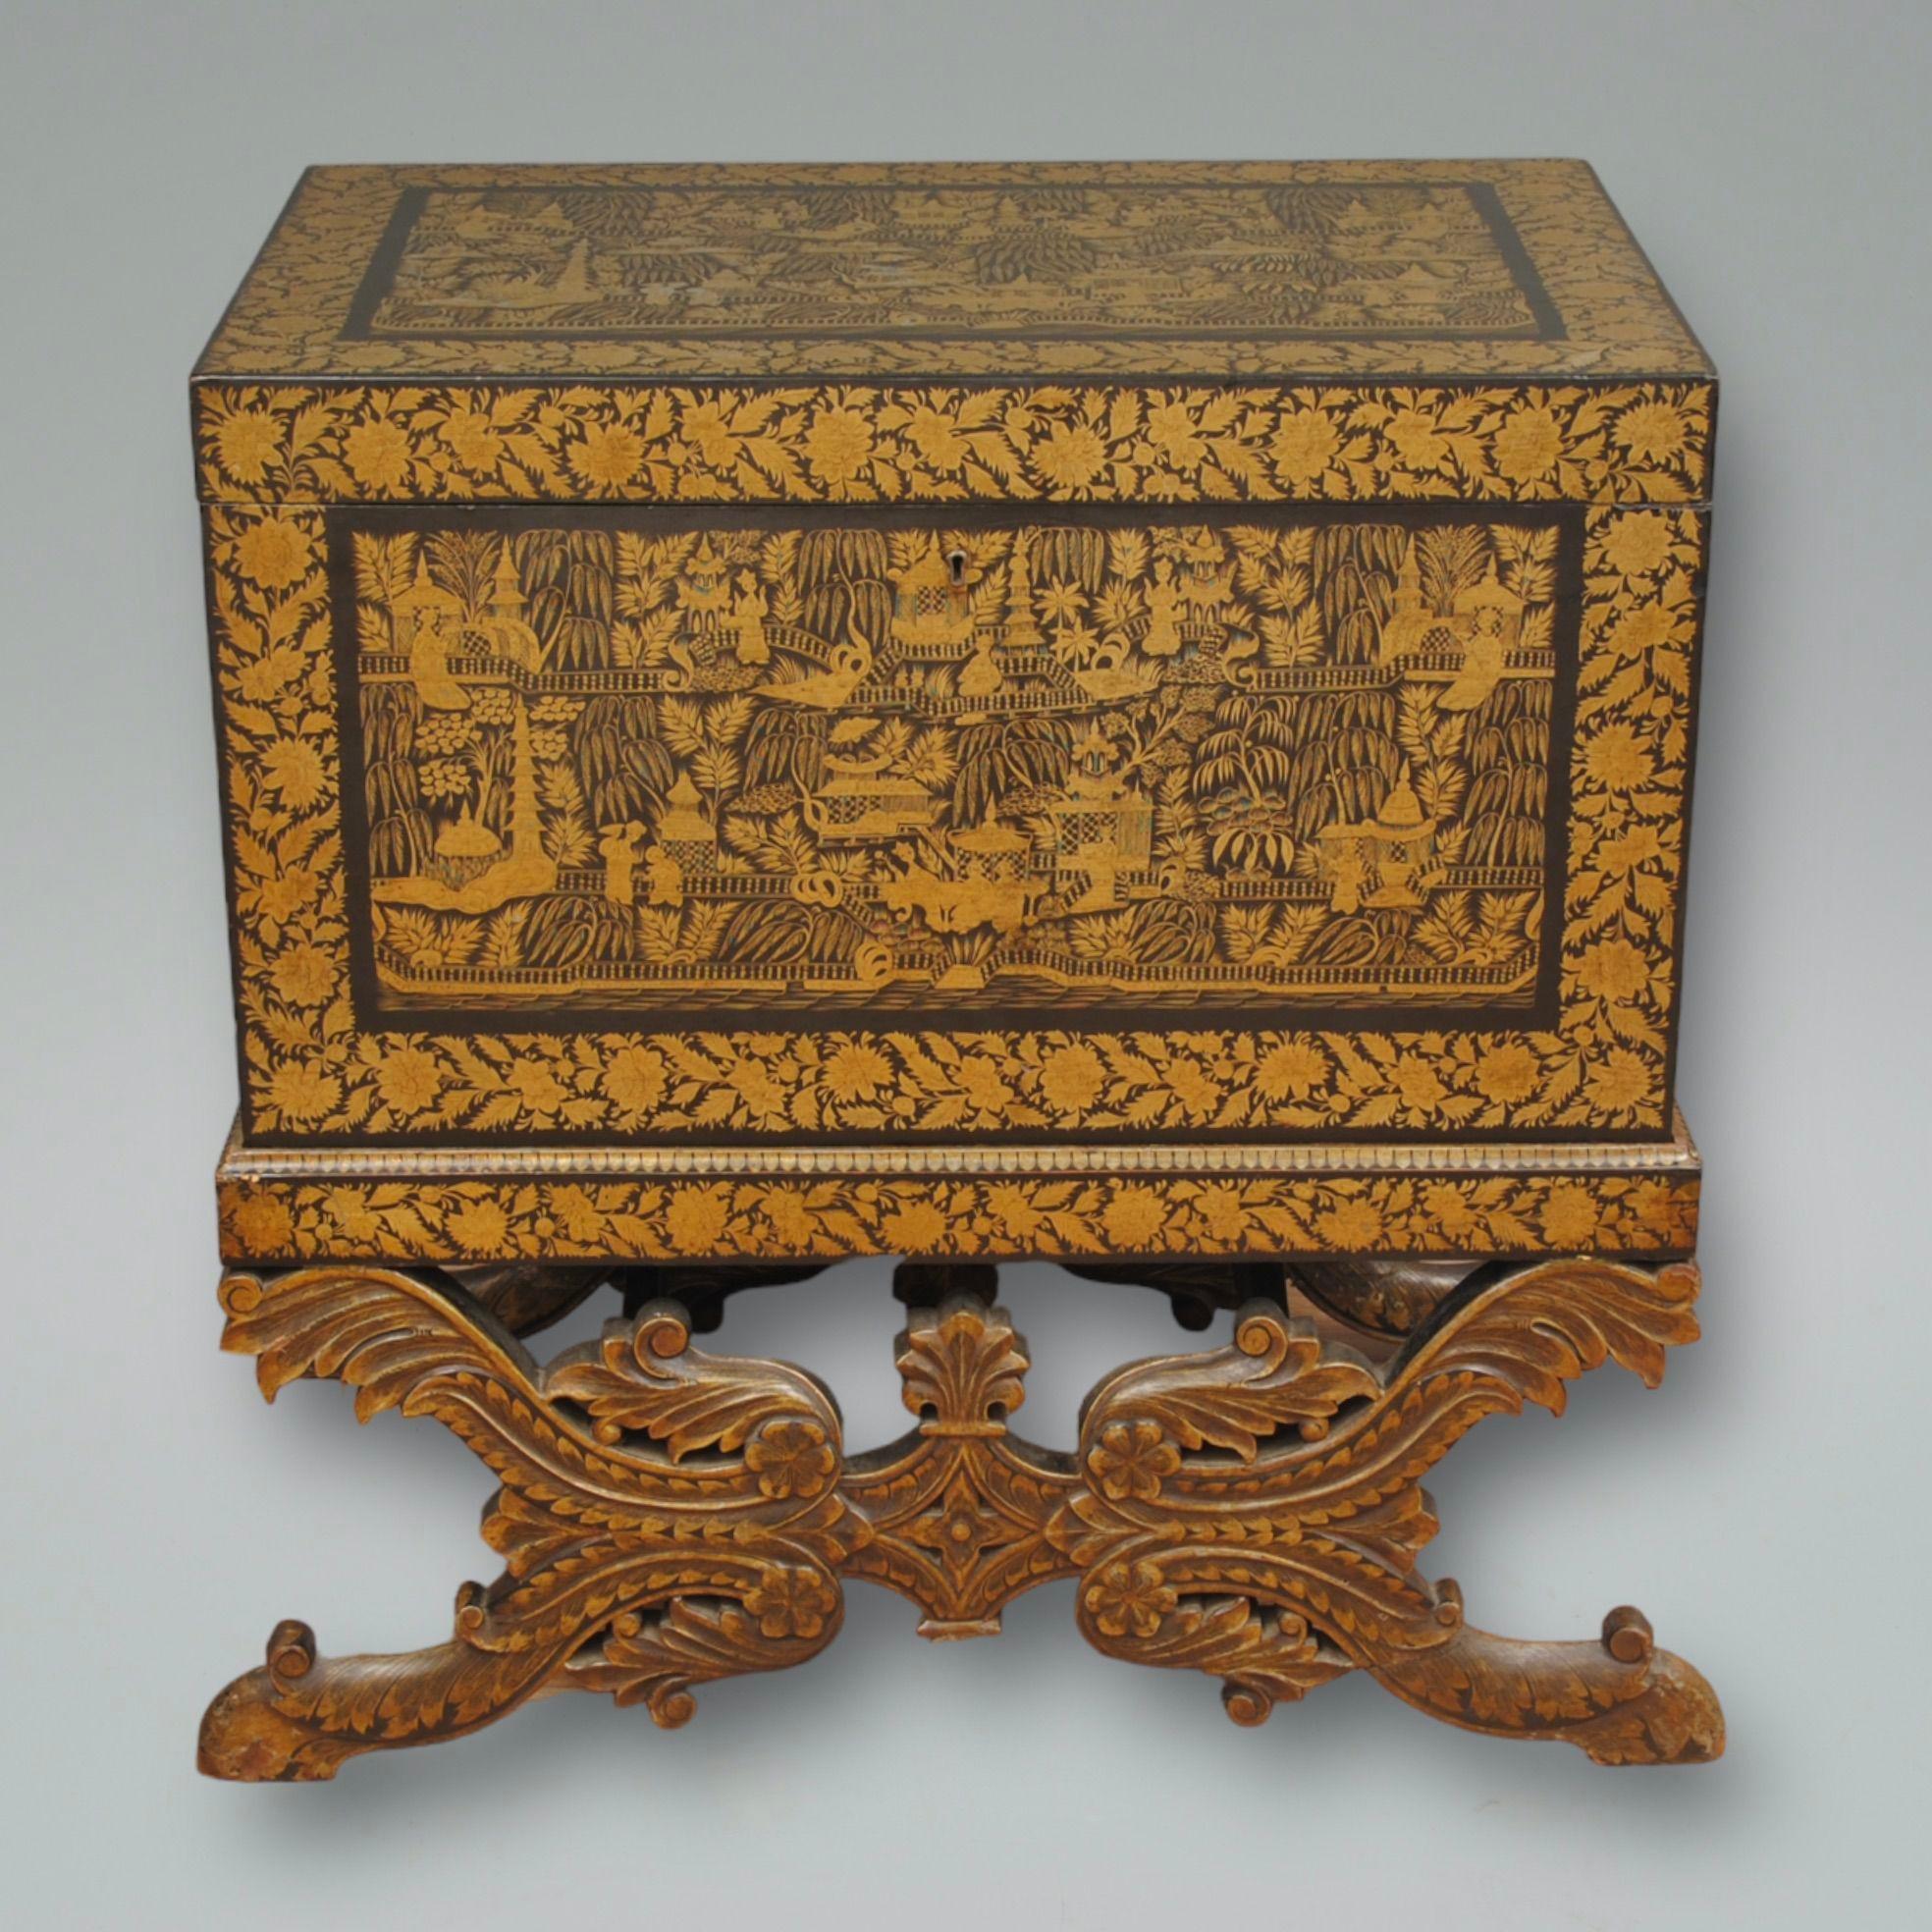 An early 19th century decorative lacquer trunk on stand, these where made in the Bareilly region and produced to export to Europe. this example is decorated with pagodas and trees, and has the original blue colour inside
Circa 1830